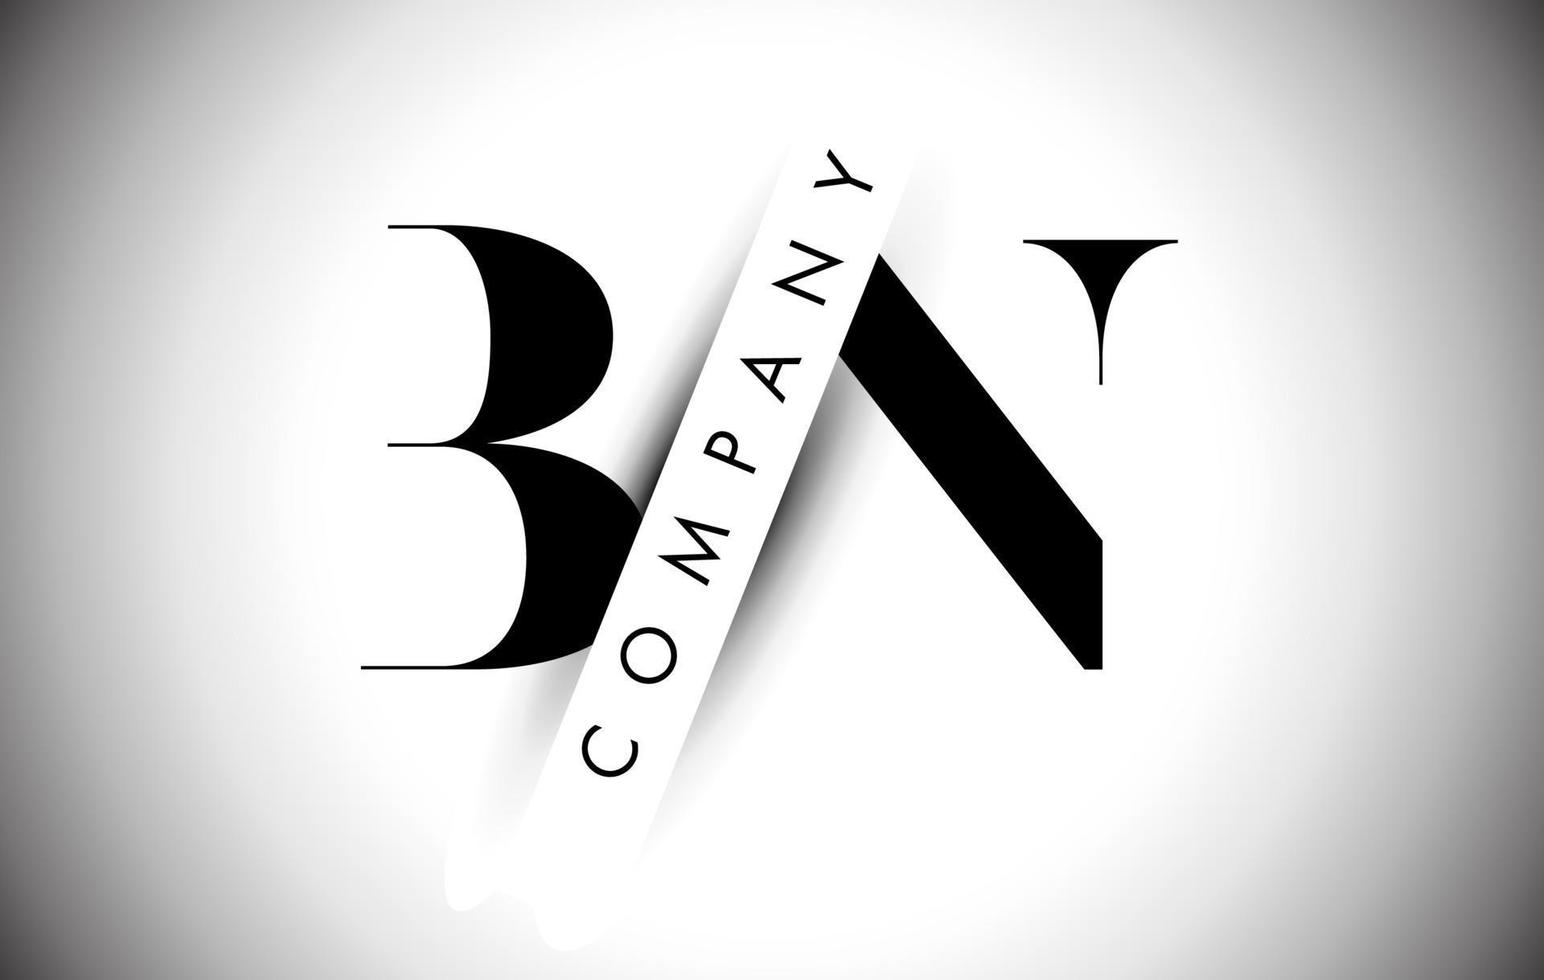 BN B N Letter Logo with Creative Shadow Cut and Overlayered Text Design. vector